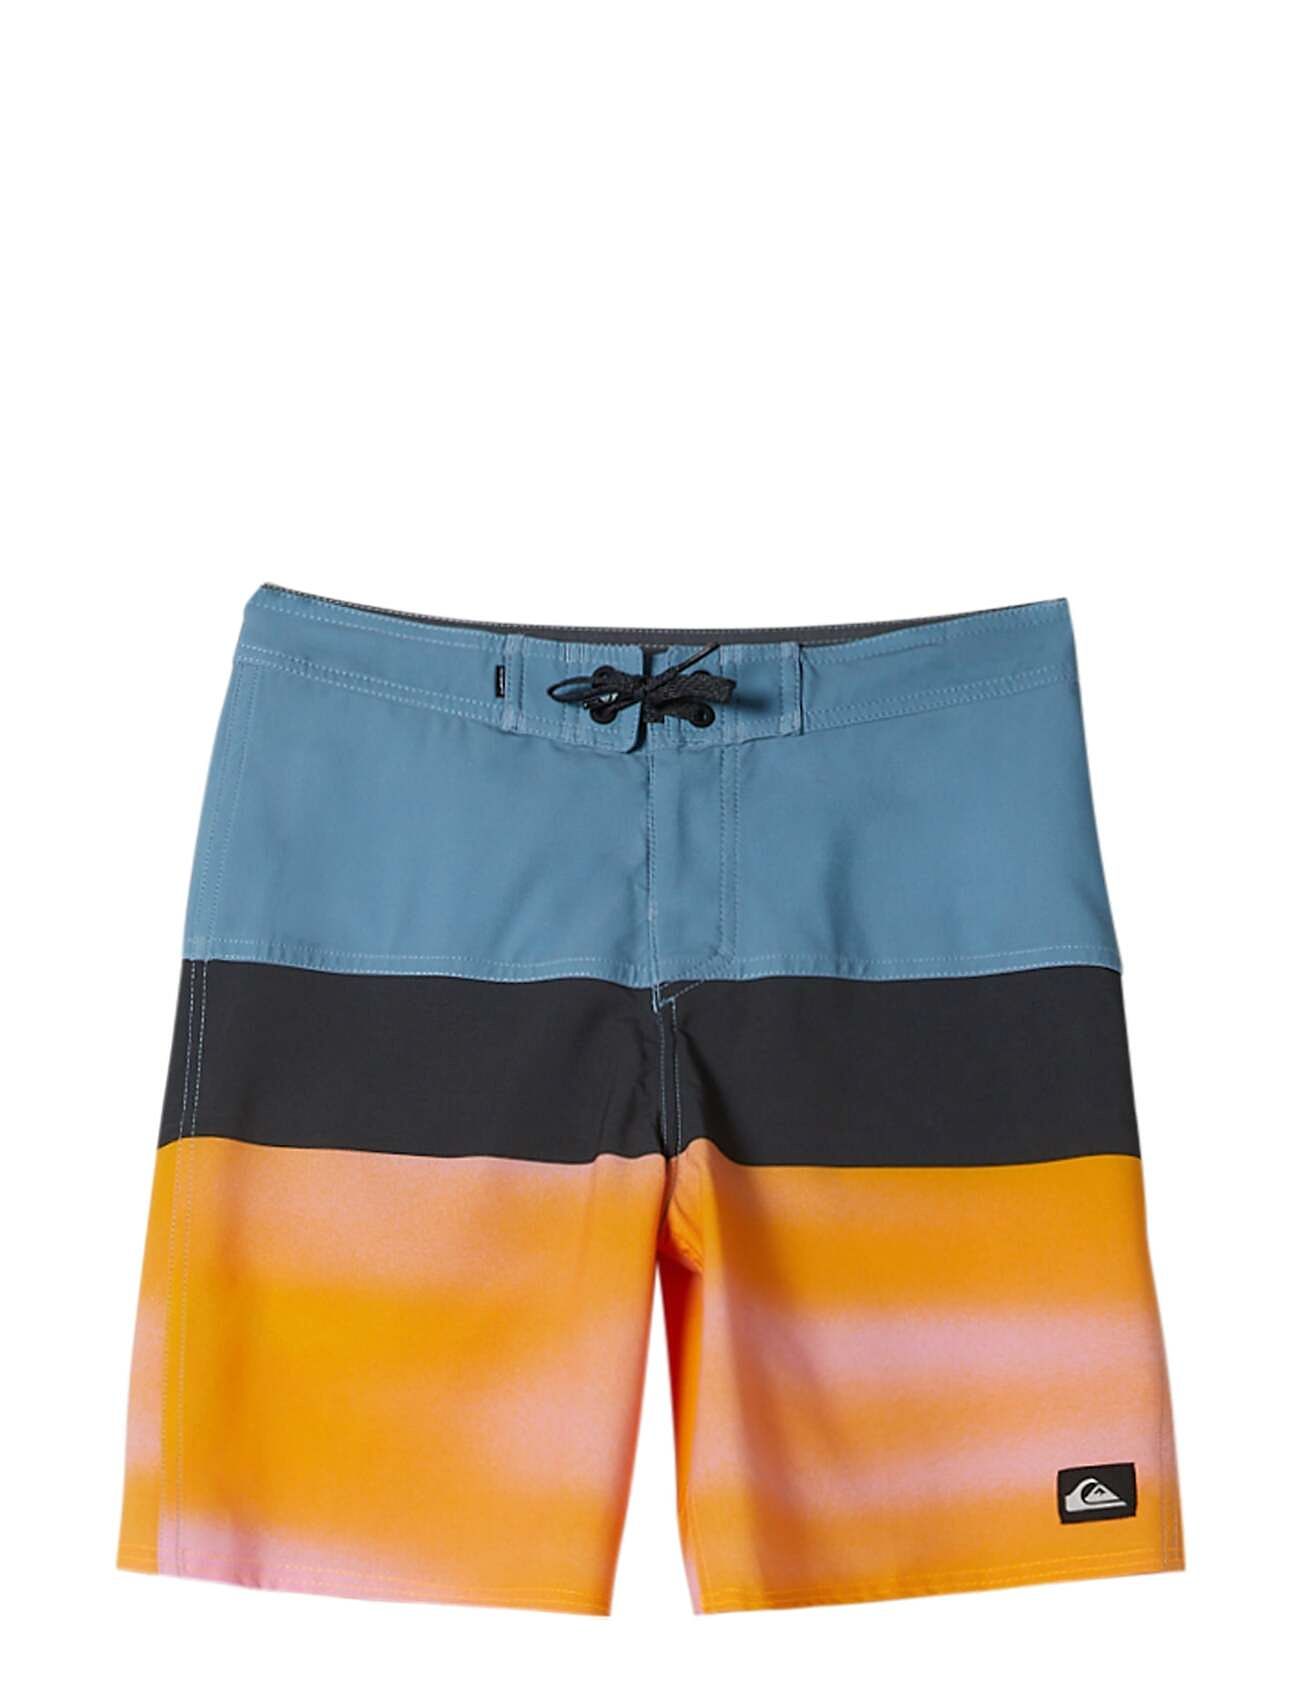 Everyday Panel Yth 17 Badeshorts Multi/patterned Quiksilver